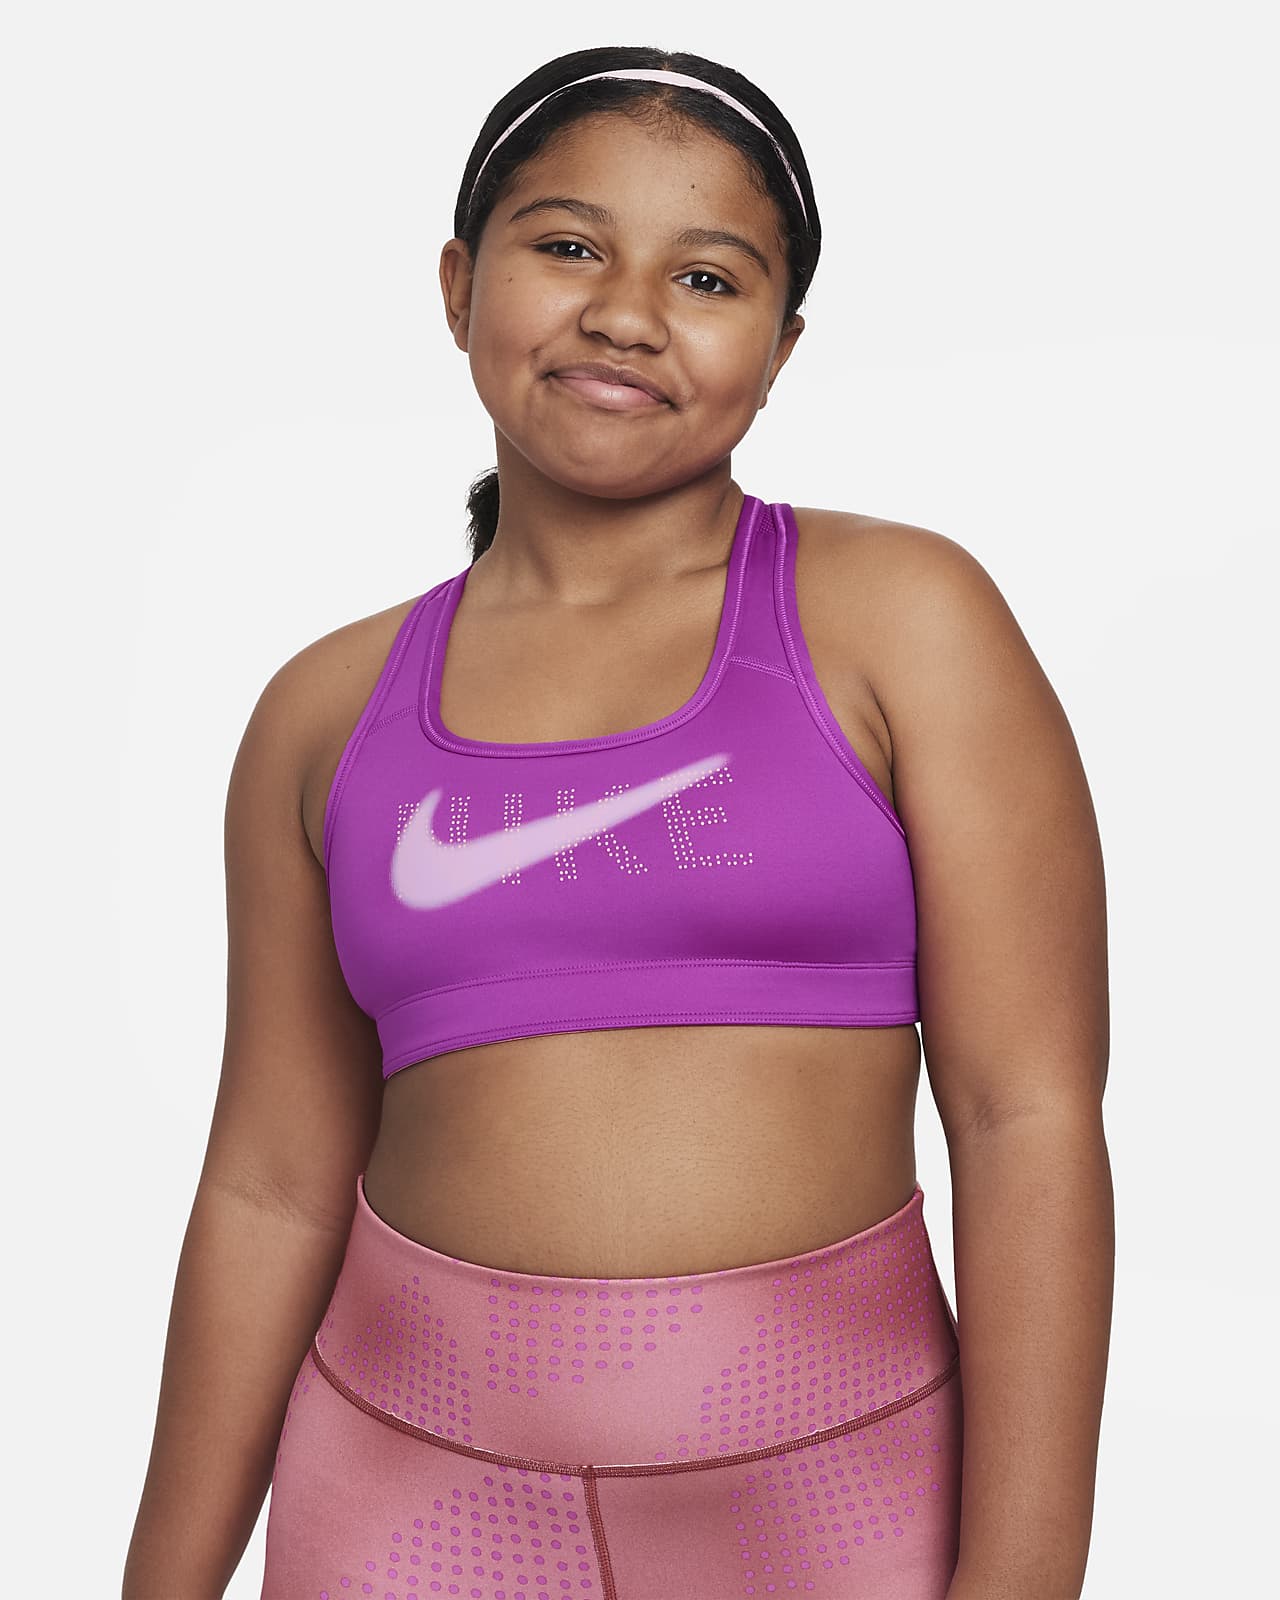  Nike Girl's Swoosh Bra Extended Size (Big Kids) Carbon  Heather/White S+ (8-9 Plus Big Kid): Clothing, Shoes & Jewelry